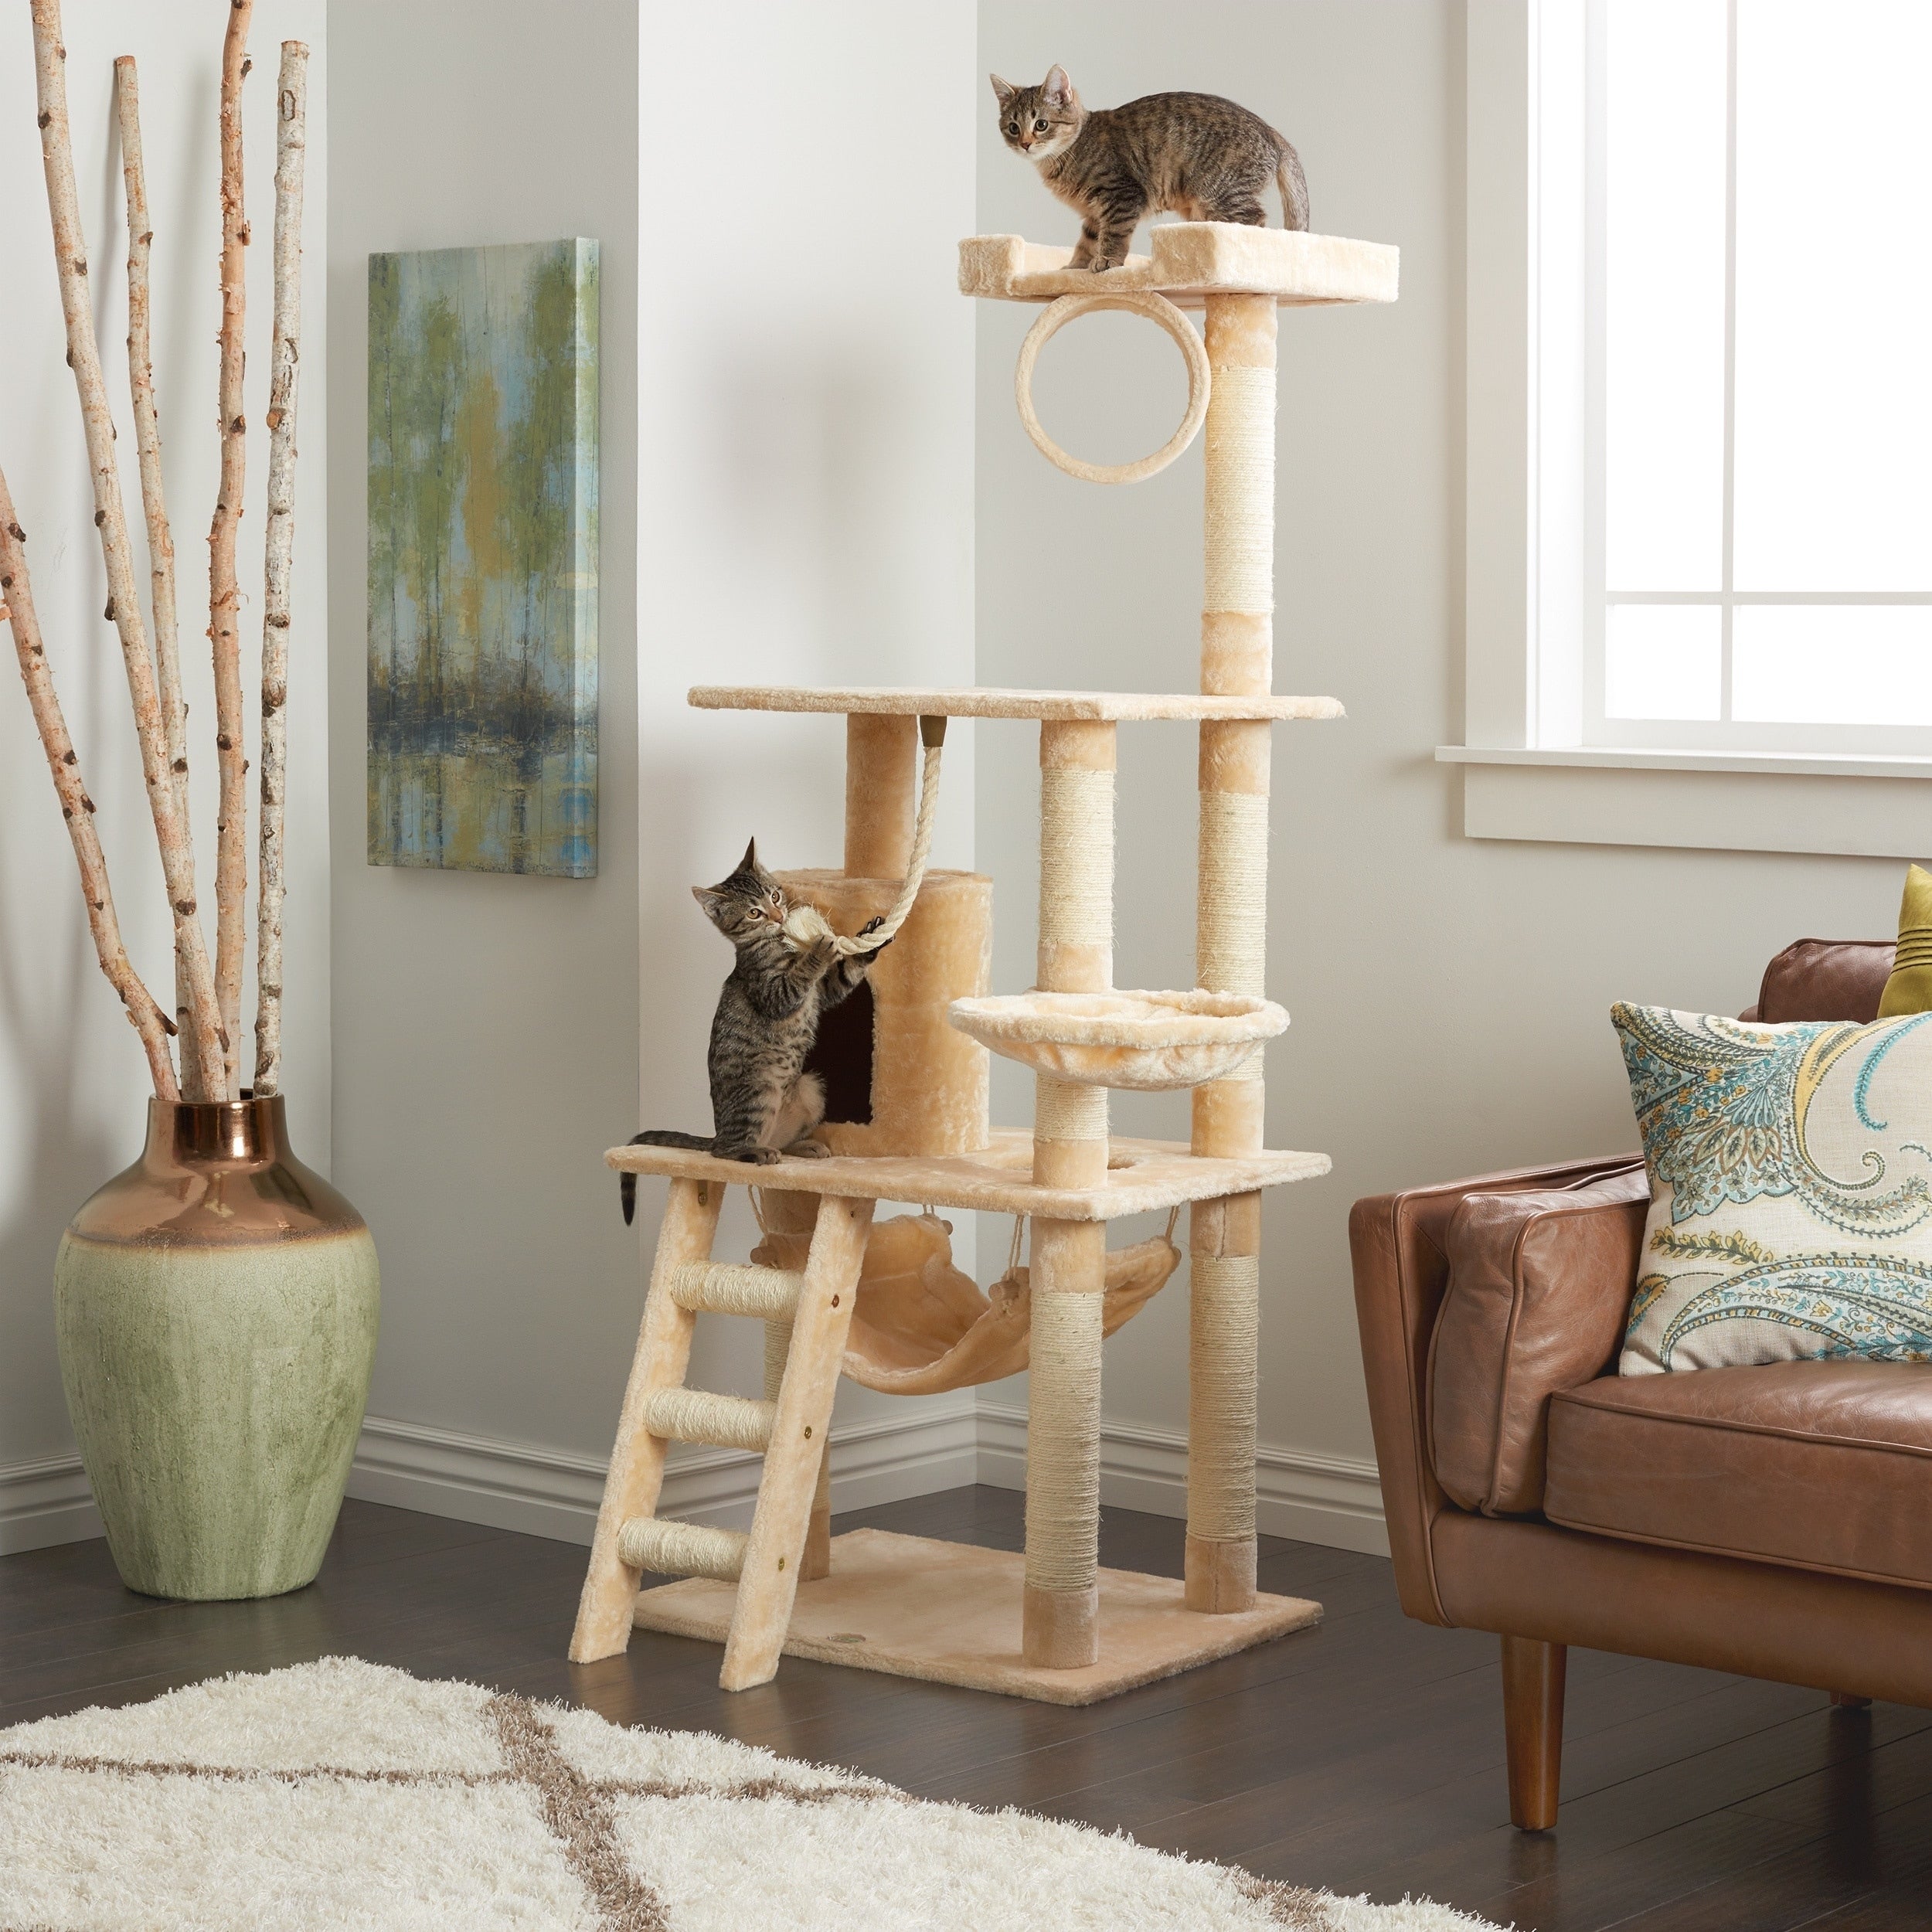 Build a Designer Climbing Space for Your Cats